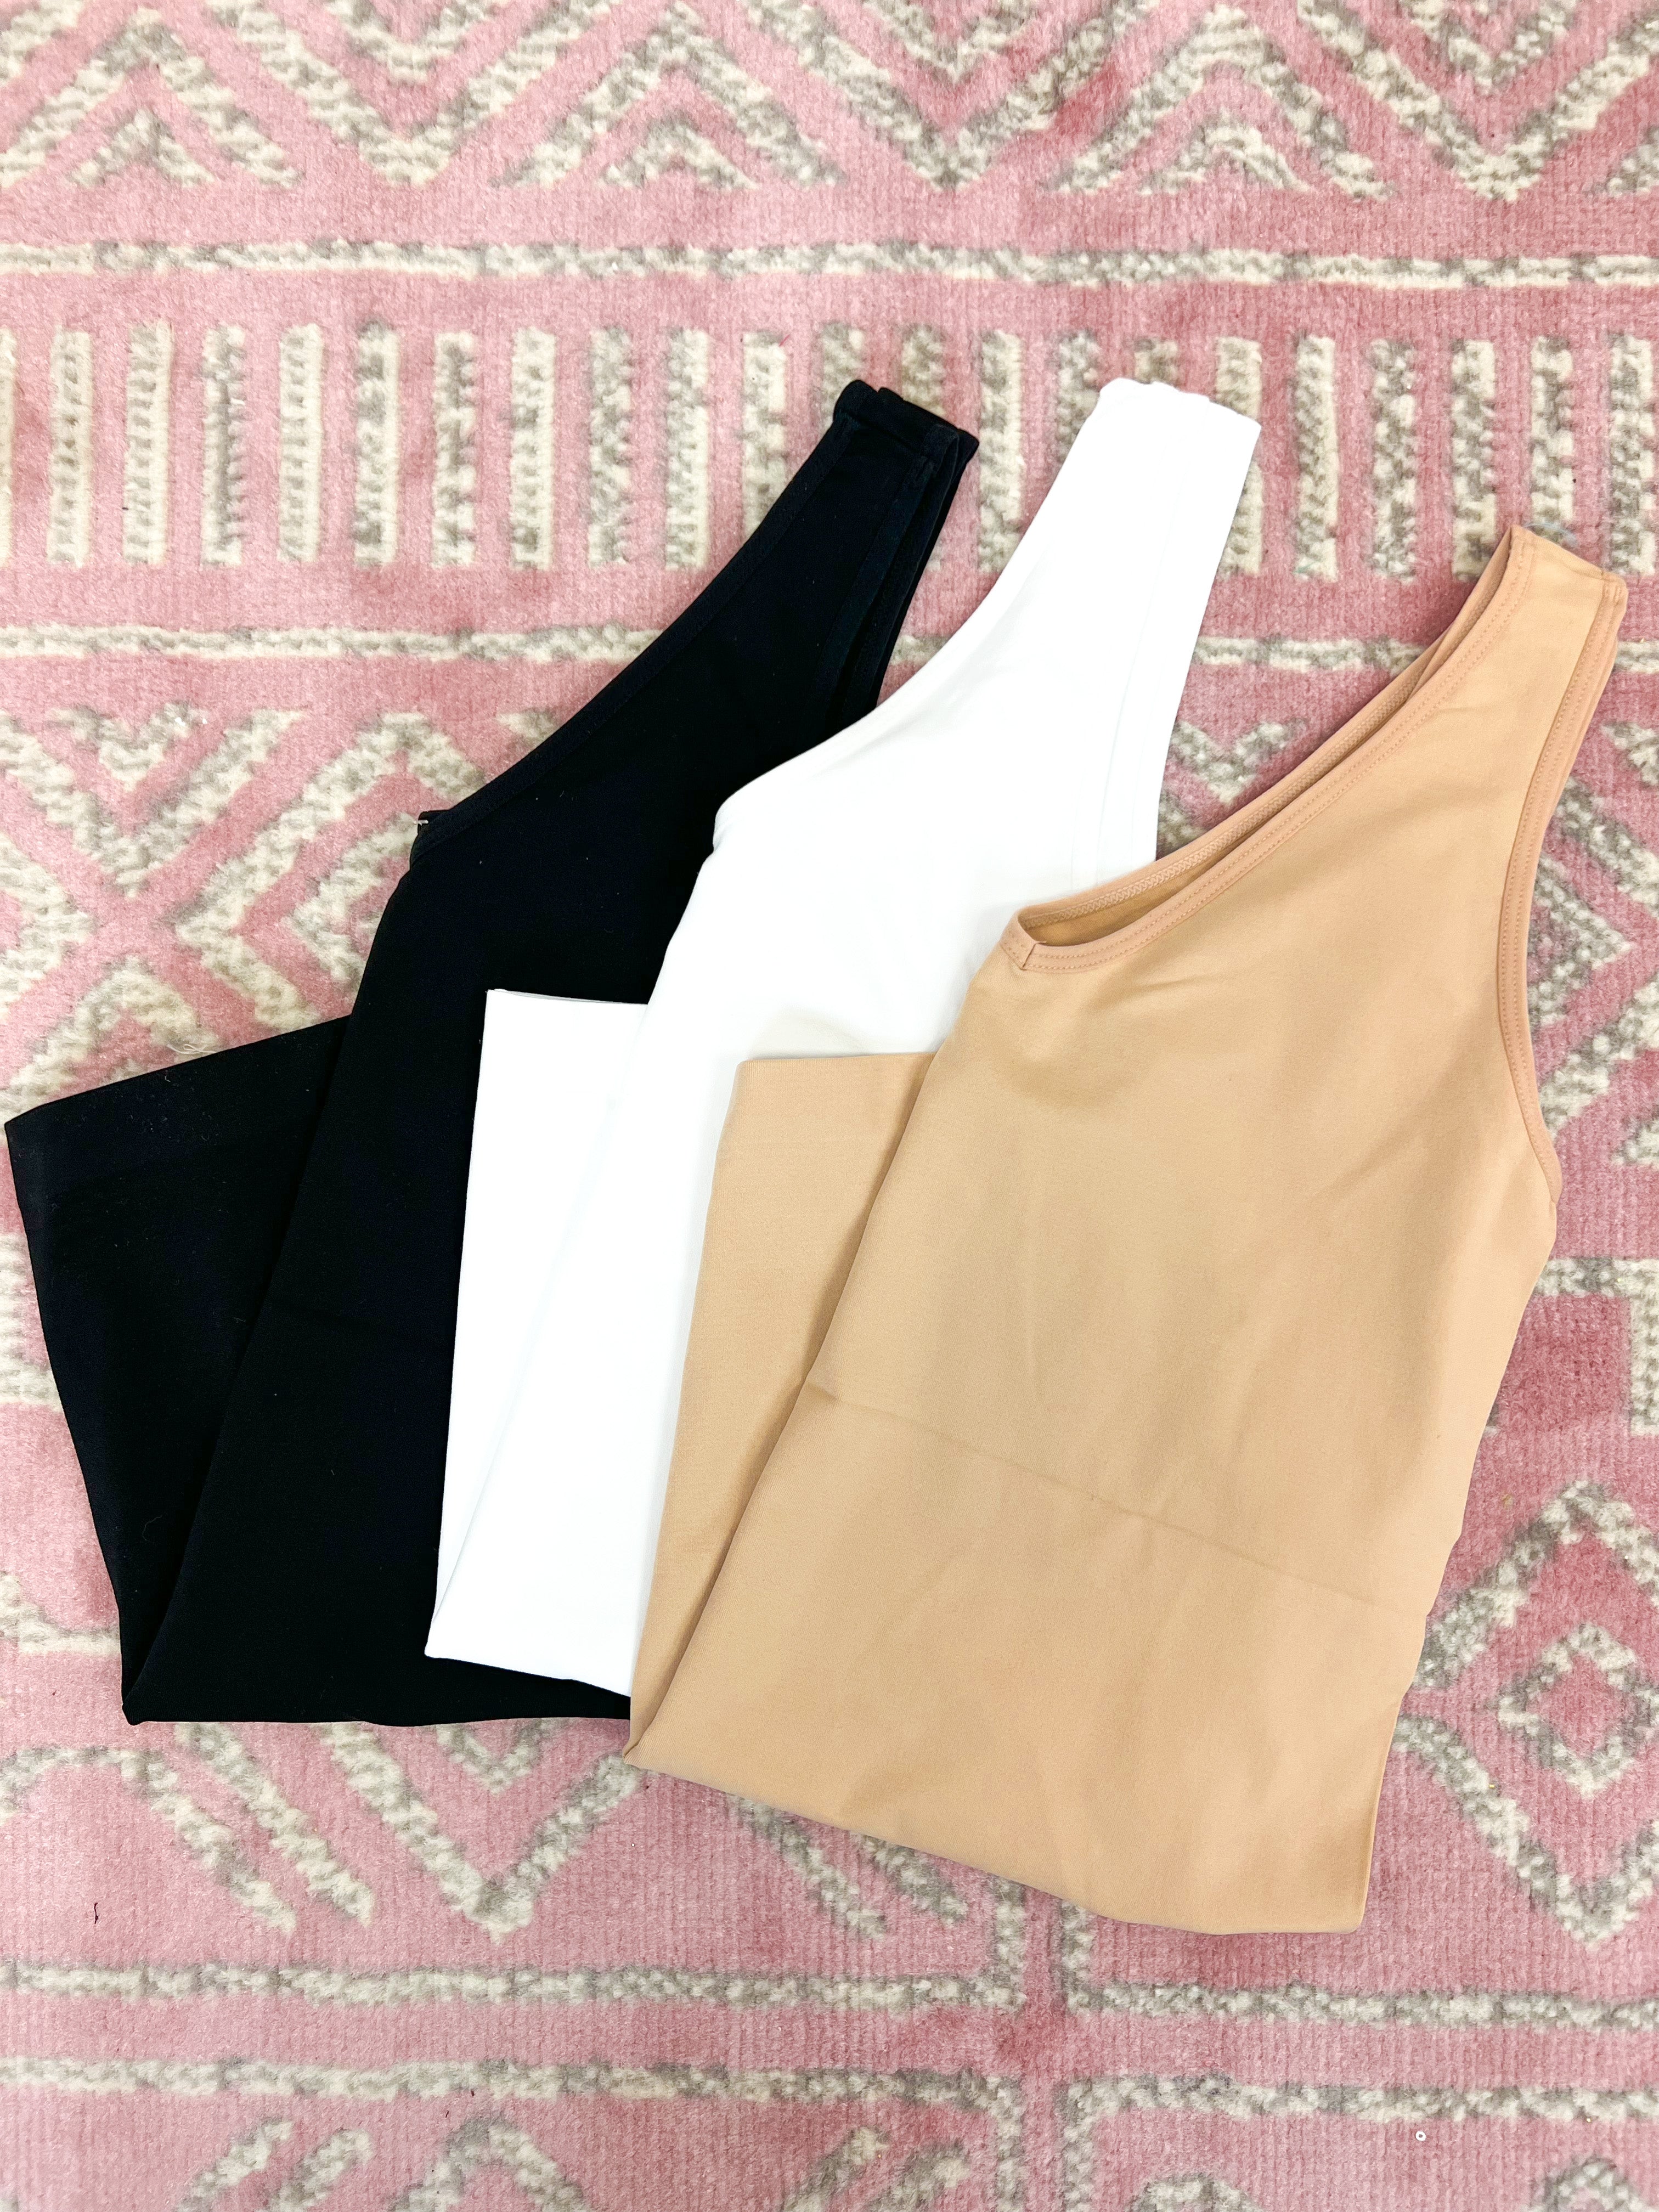 Reversible Tank-120 Sleeveless Tops-The Lovely Closet-The Lovely Closet, Women's Fashion Boutique in Alexandria, KY